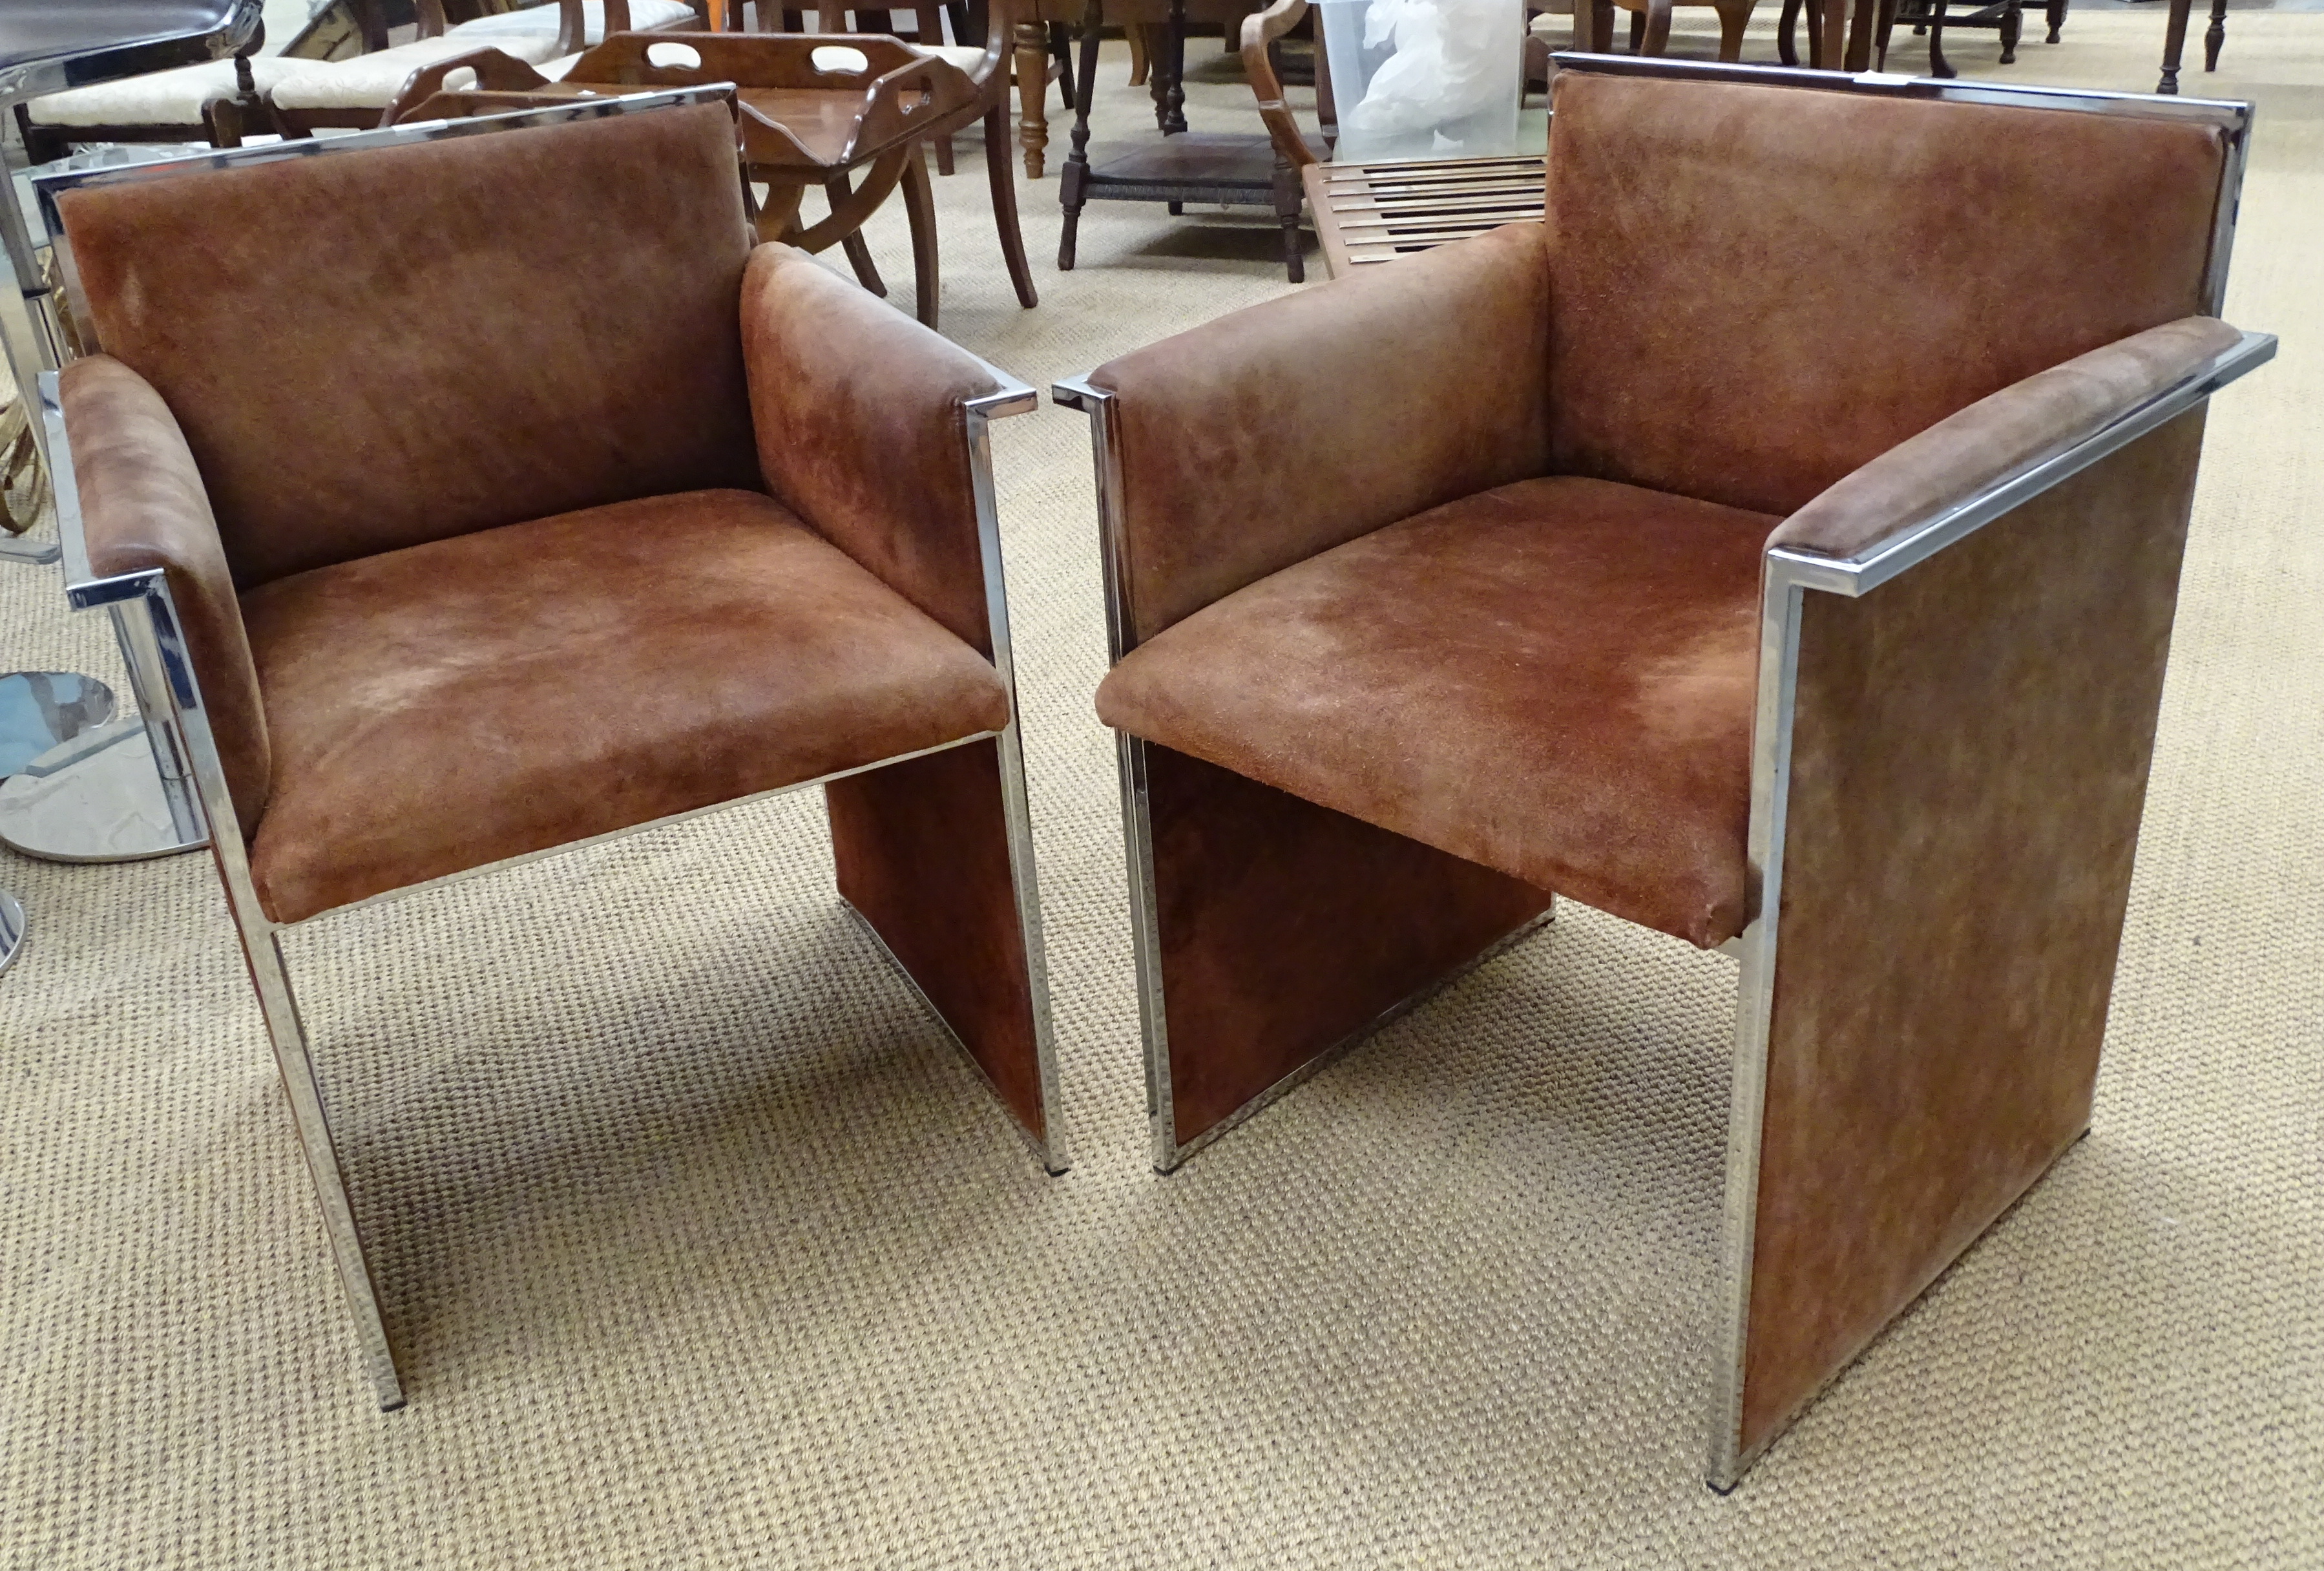 A pair of brown suede-upholstered chrome armchairs, (some fading and discolouration), (2).